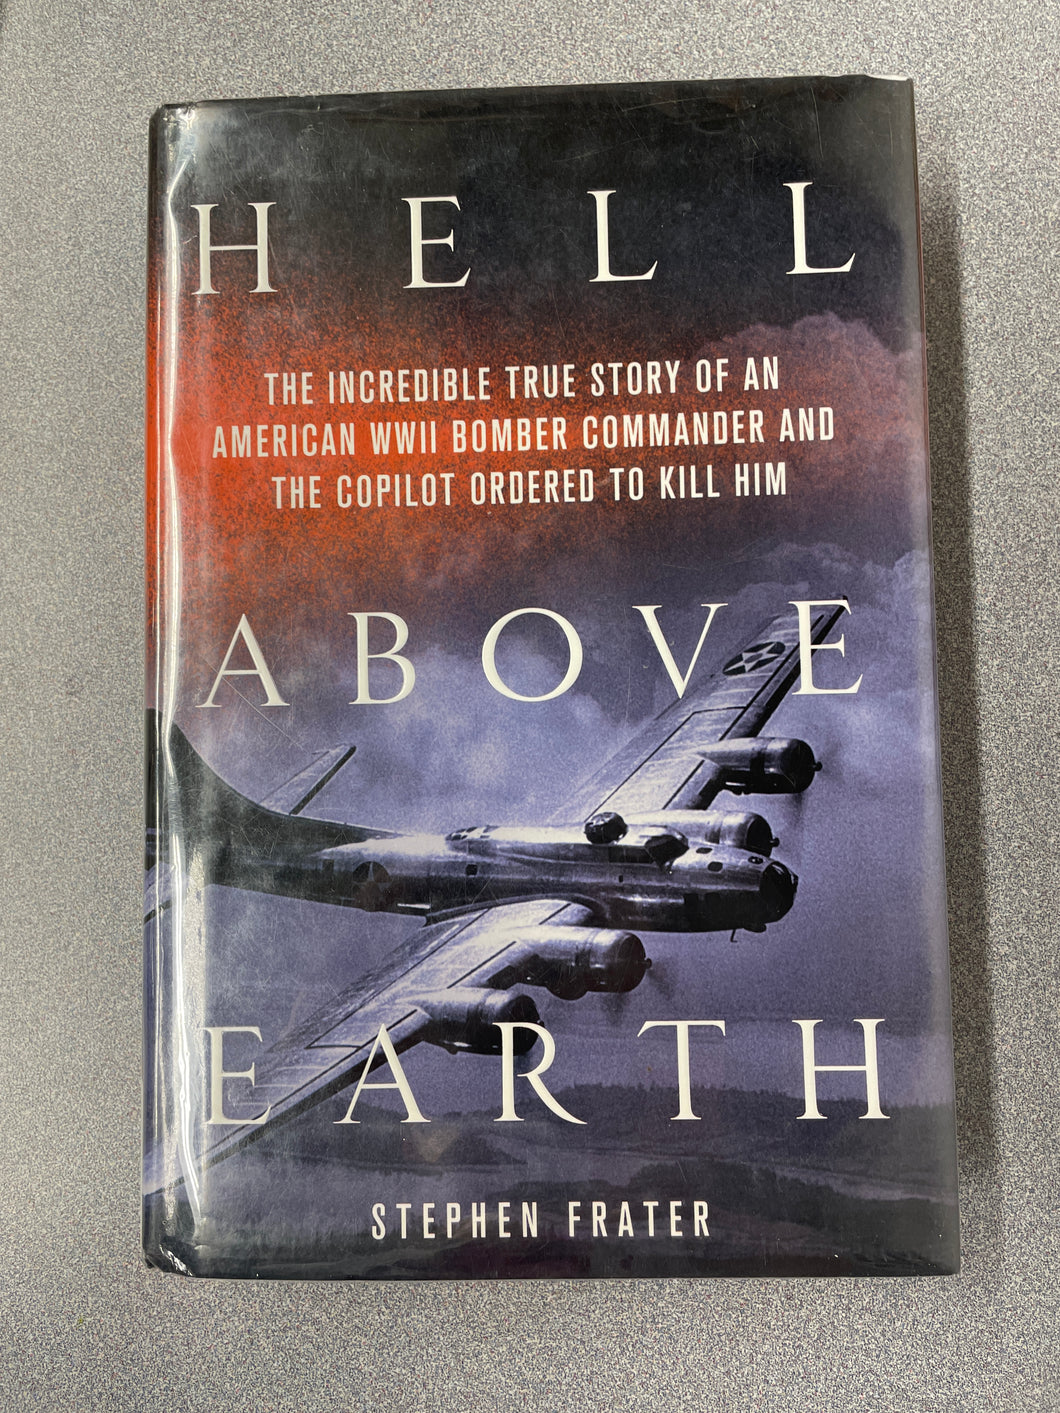 Hell Above Earth: The Incredible True Story of an American WWII Bomber Commander and the Copilot Ordered to Kill Him, Frater, Stephen [2012] TS 3/24